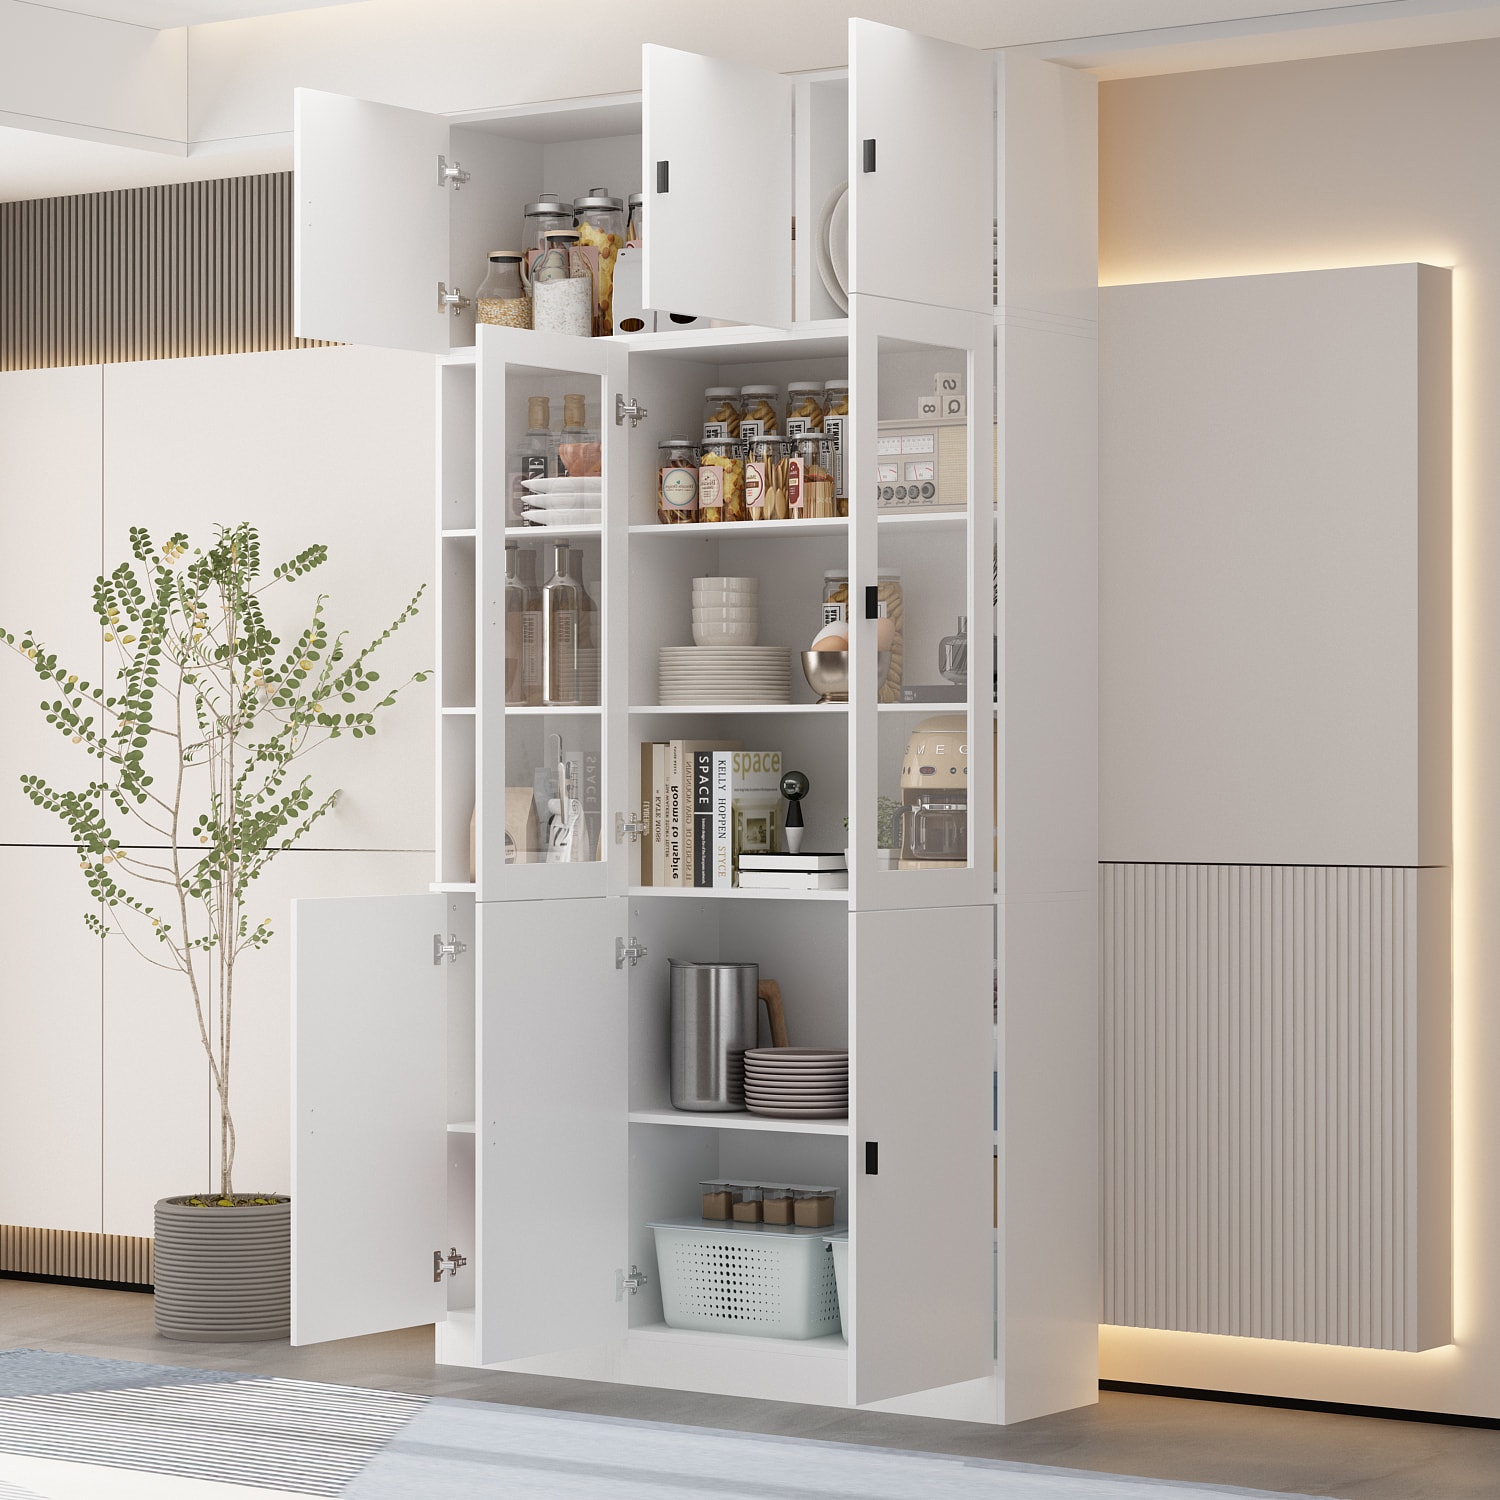 FUFU&GAGA Contemporary/Modern White Pantry with Wine Storage in the ...